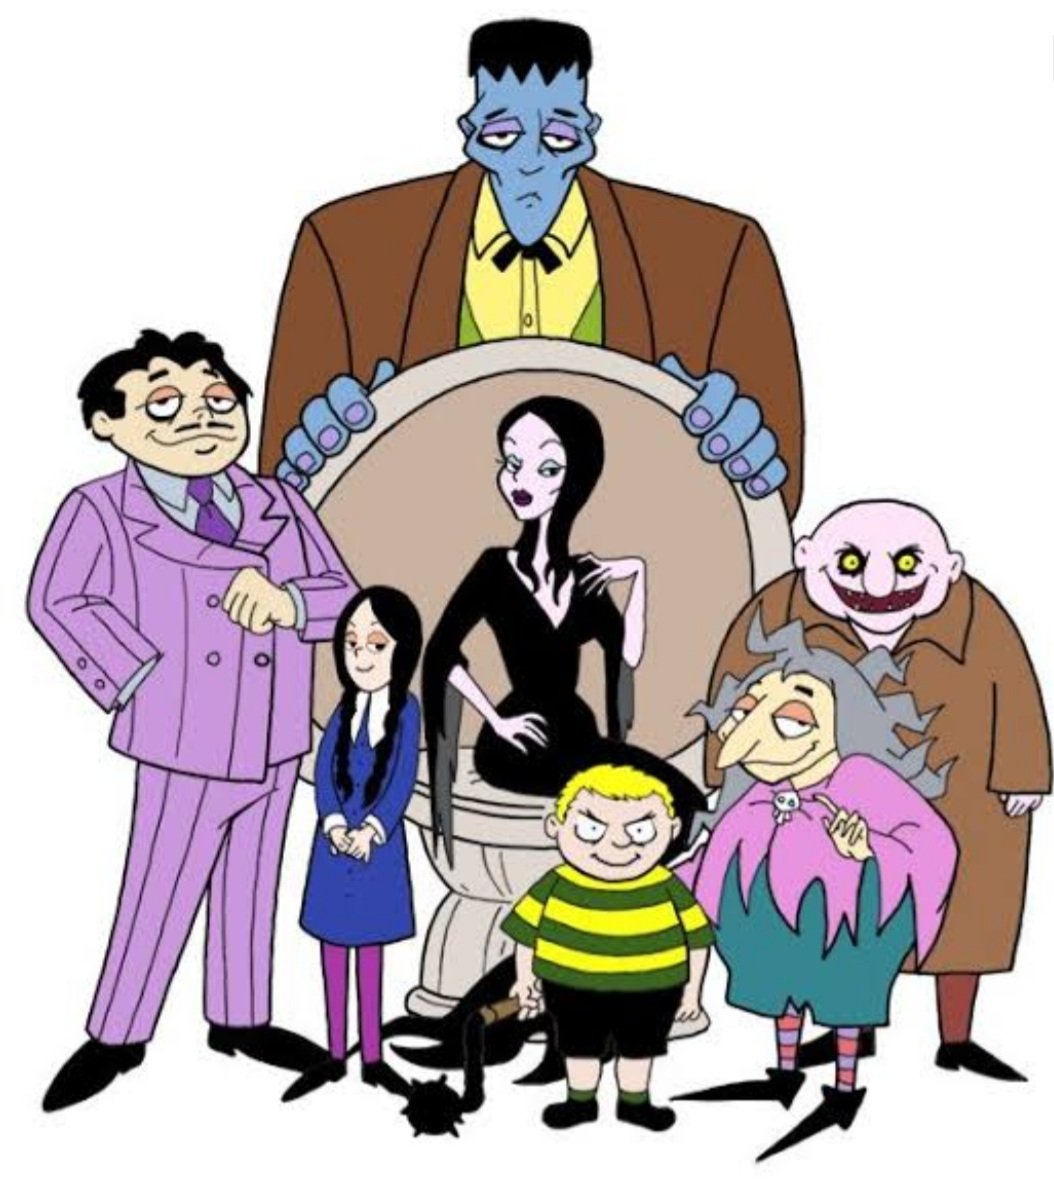 As a kid, I failed to realize how cool this show actually was

#cartoons #animation #addamsfamily #cartoonnetwork #90s #cartoonblog #hannabarbera